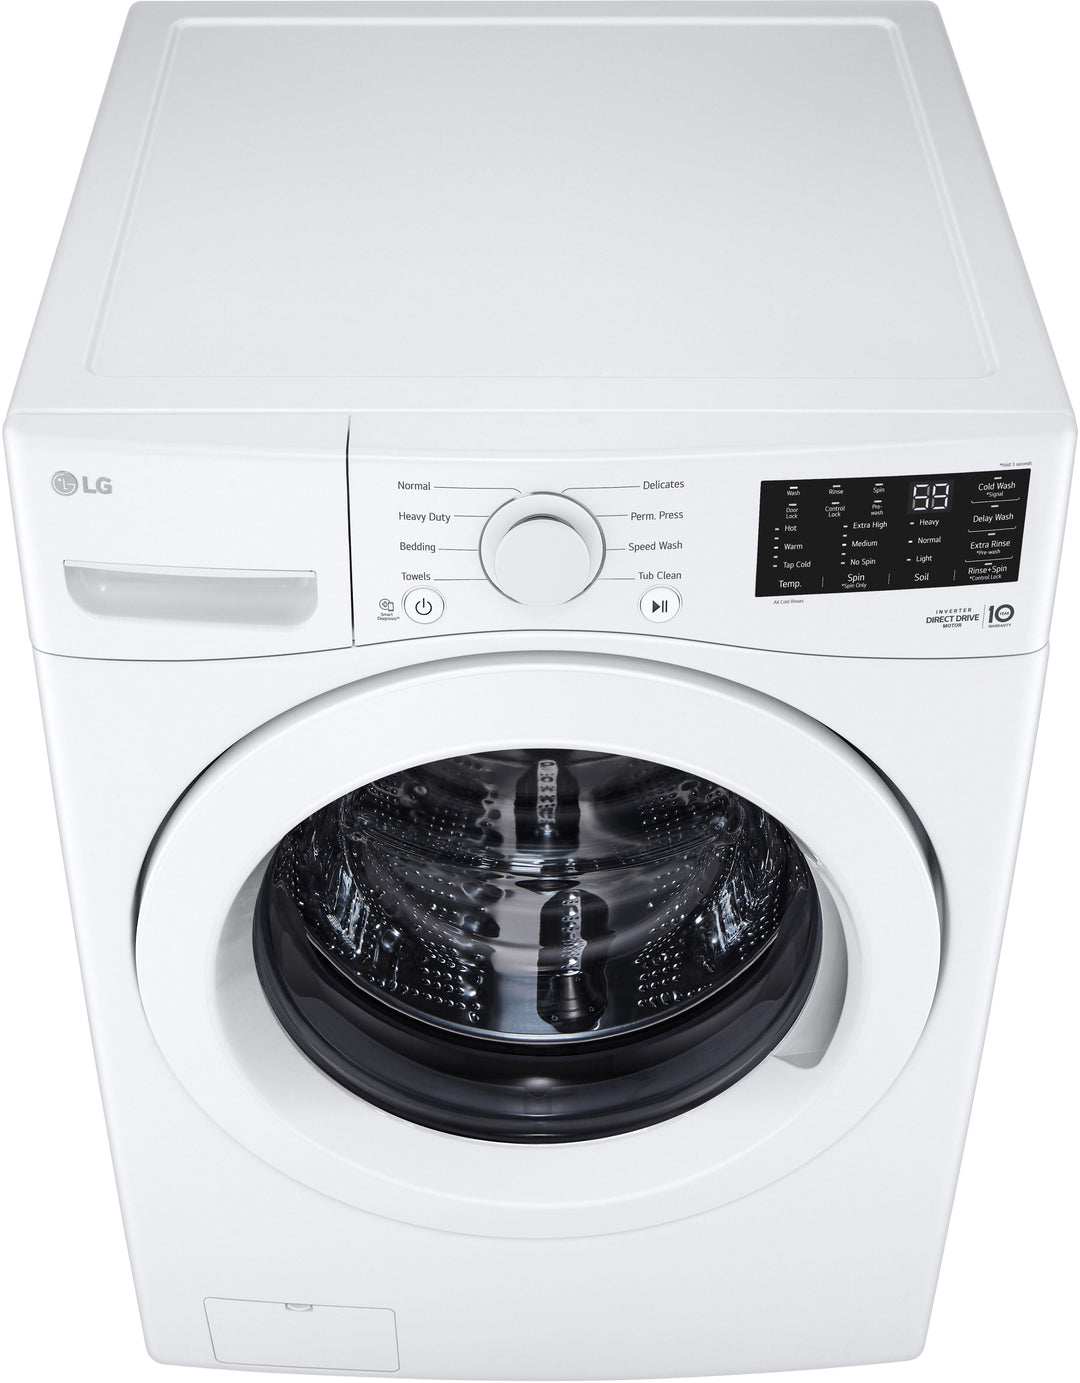 LG - 5.0 Cu. Ft. High-Efficiency Smart Front Load Washer with 6Motion Technology - White_7